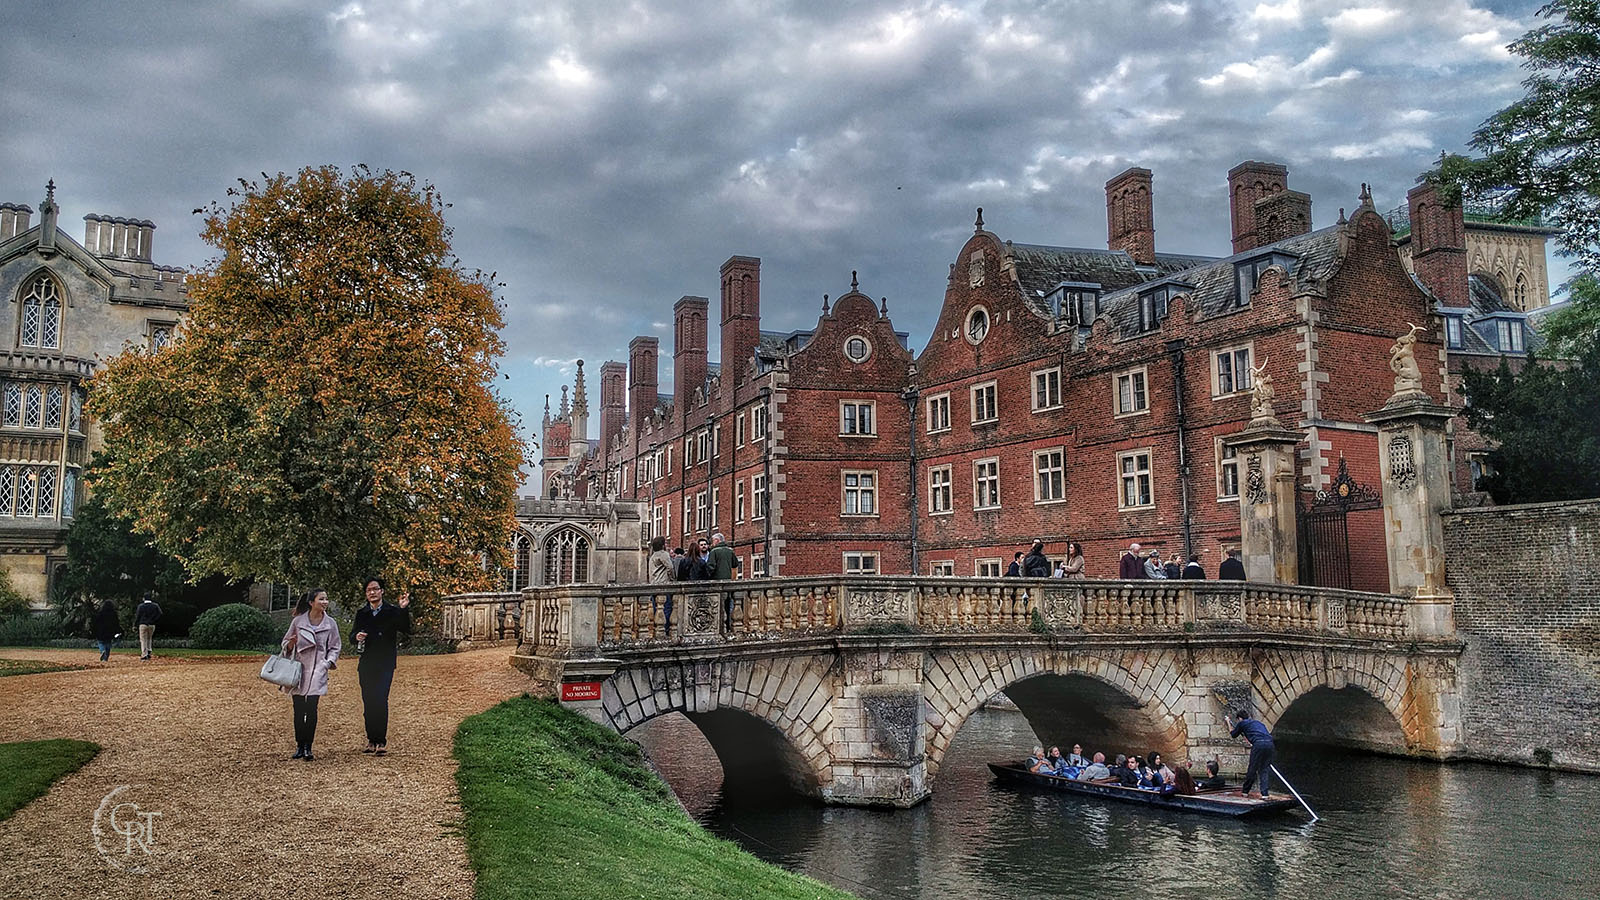 St John's college, Cambridge showing Kitchen bridge and the old court buildings